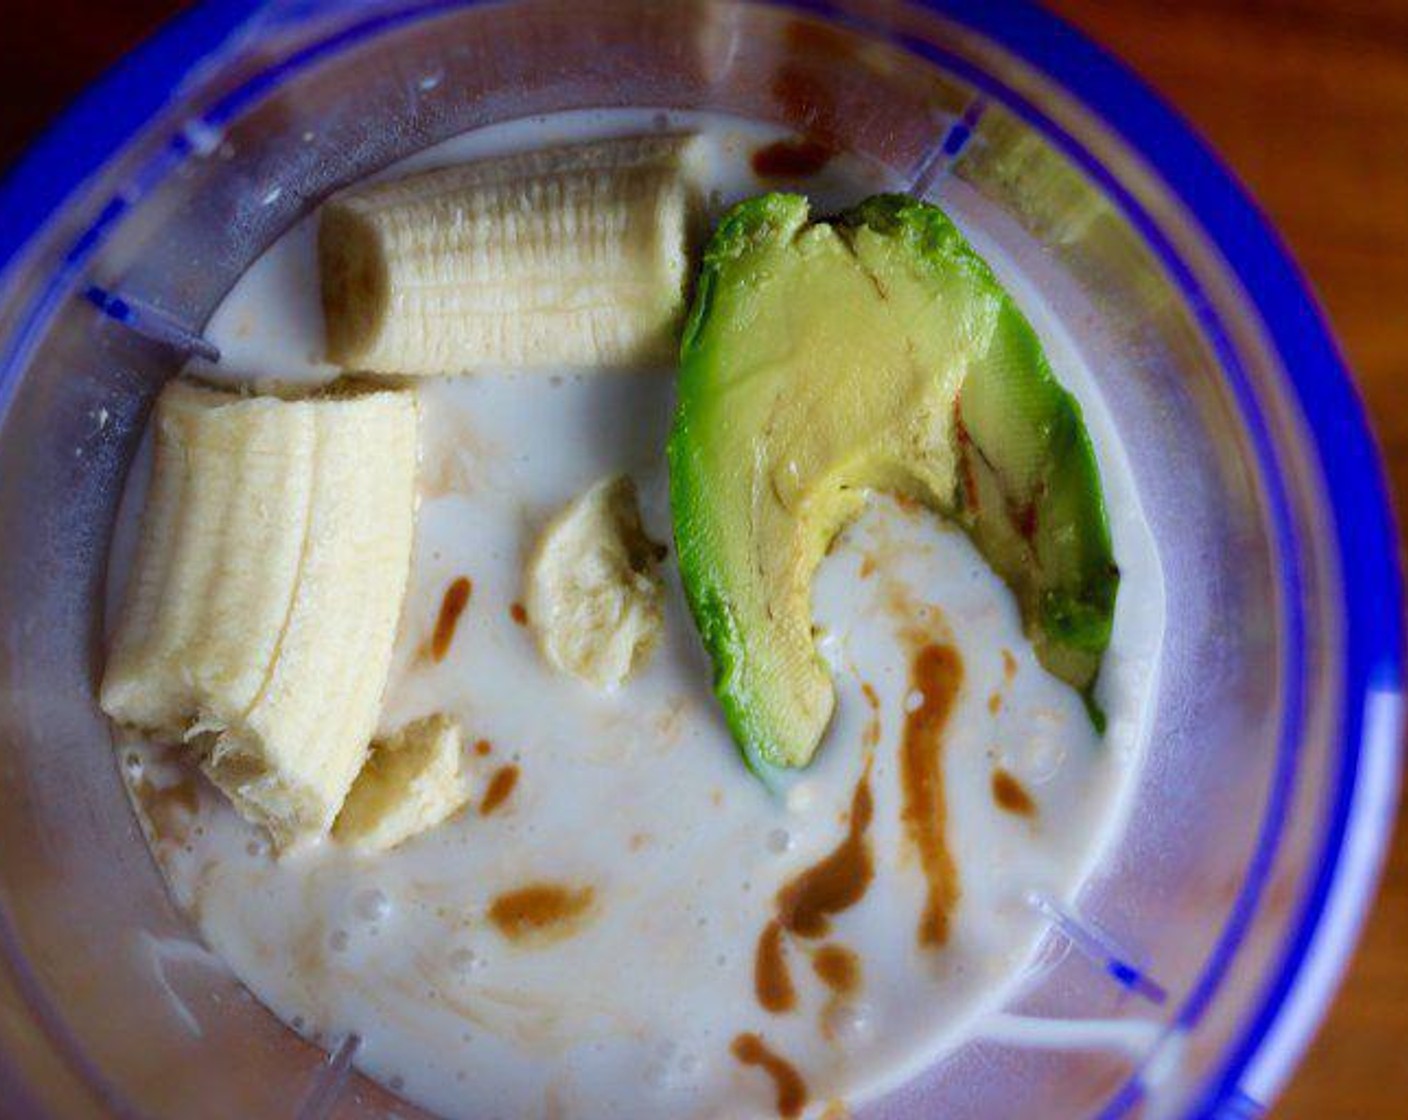 step 1 Put Coconut Water (to taste) in the bottom of your blender and add the Oats (2 cups). Top with Coconut Milk (12 fl oz). Add Bananas (2), Peanut Butter (3 Tbsp), Avocado (1/2), and Vanilla Extract (1 dash). Top with Spinach Leaves (1 handful) if using. Add your desired amount of coconut water. Blend. Serve and enjoy!